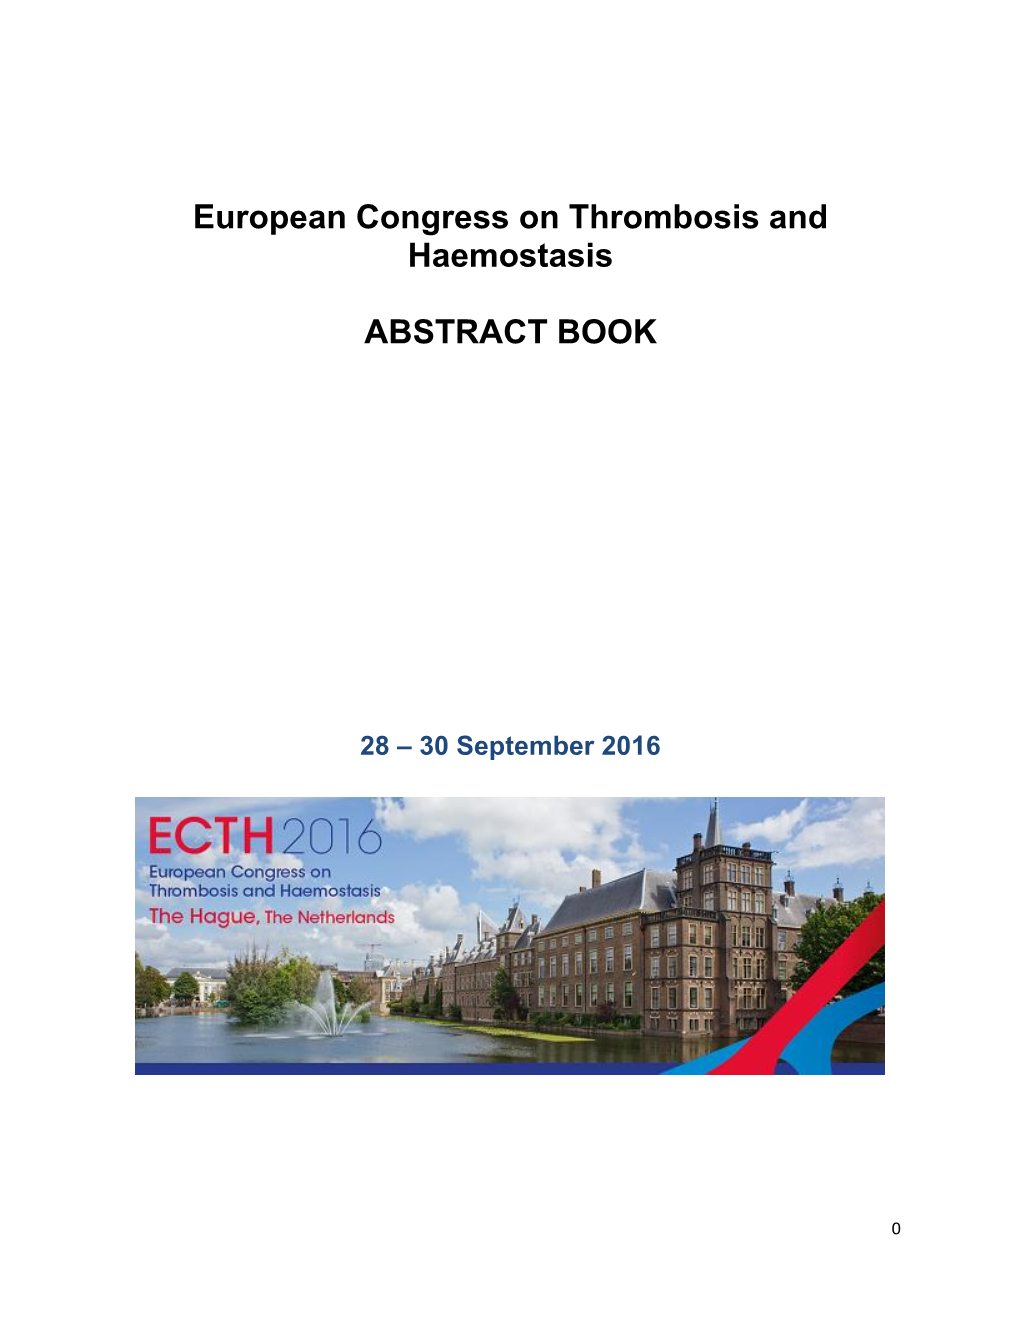 European Congress on Thrombosis and Haemostasis ABSTRACT BOOK